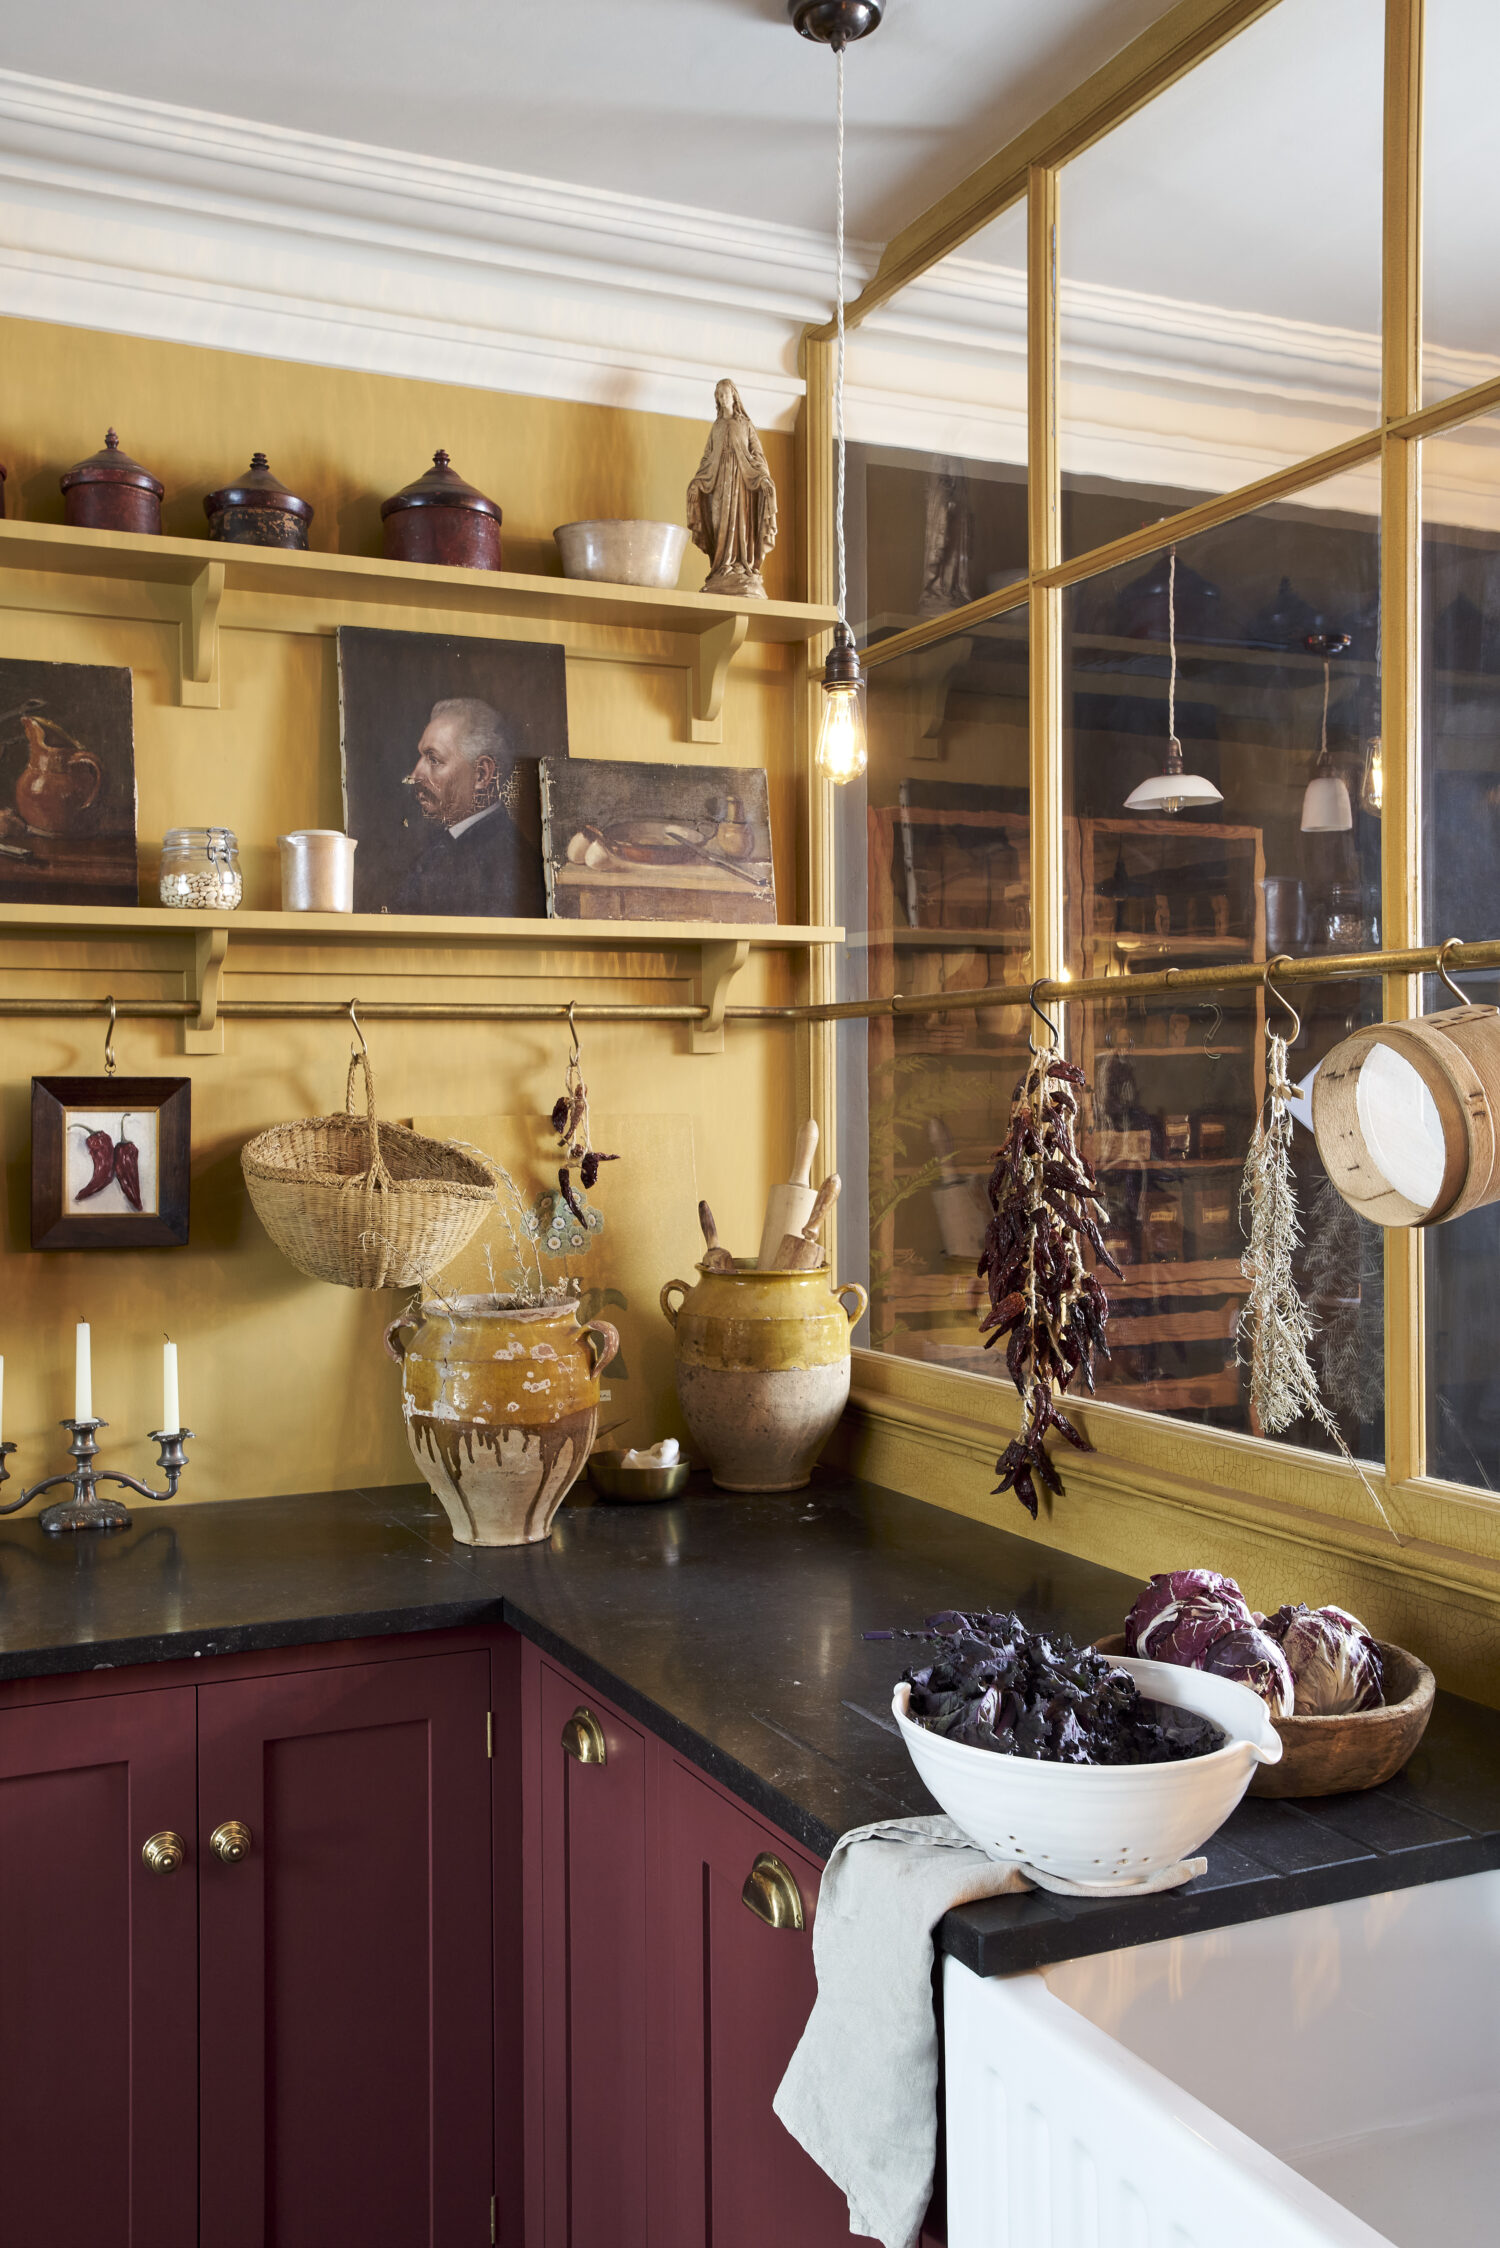 A New Look For The Real Shaker Kitchen In Our NYC Showroom - The deVOL ...